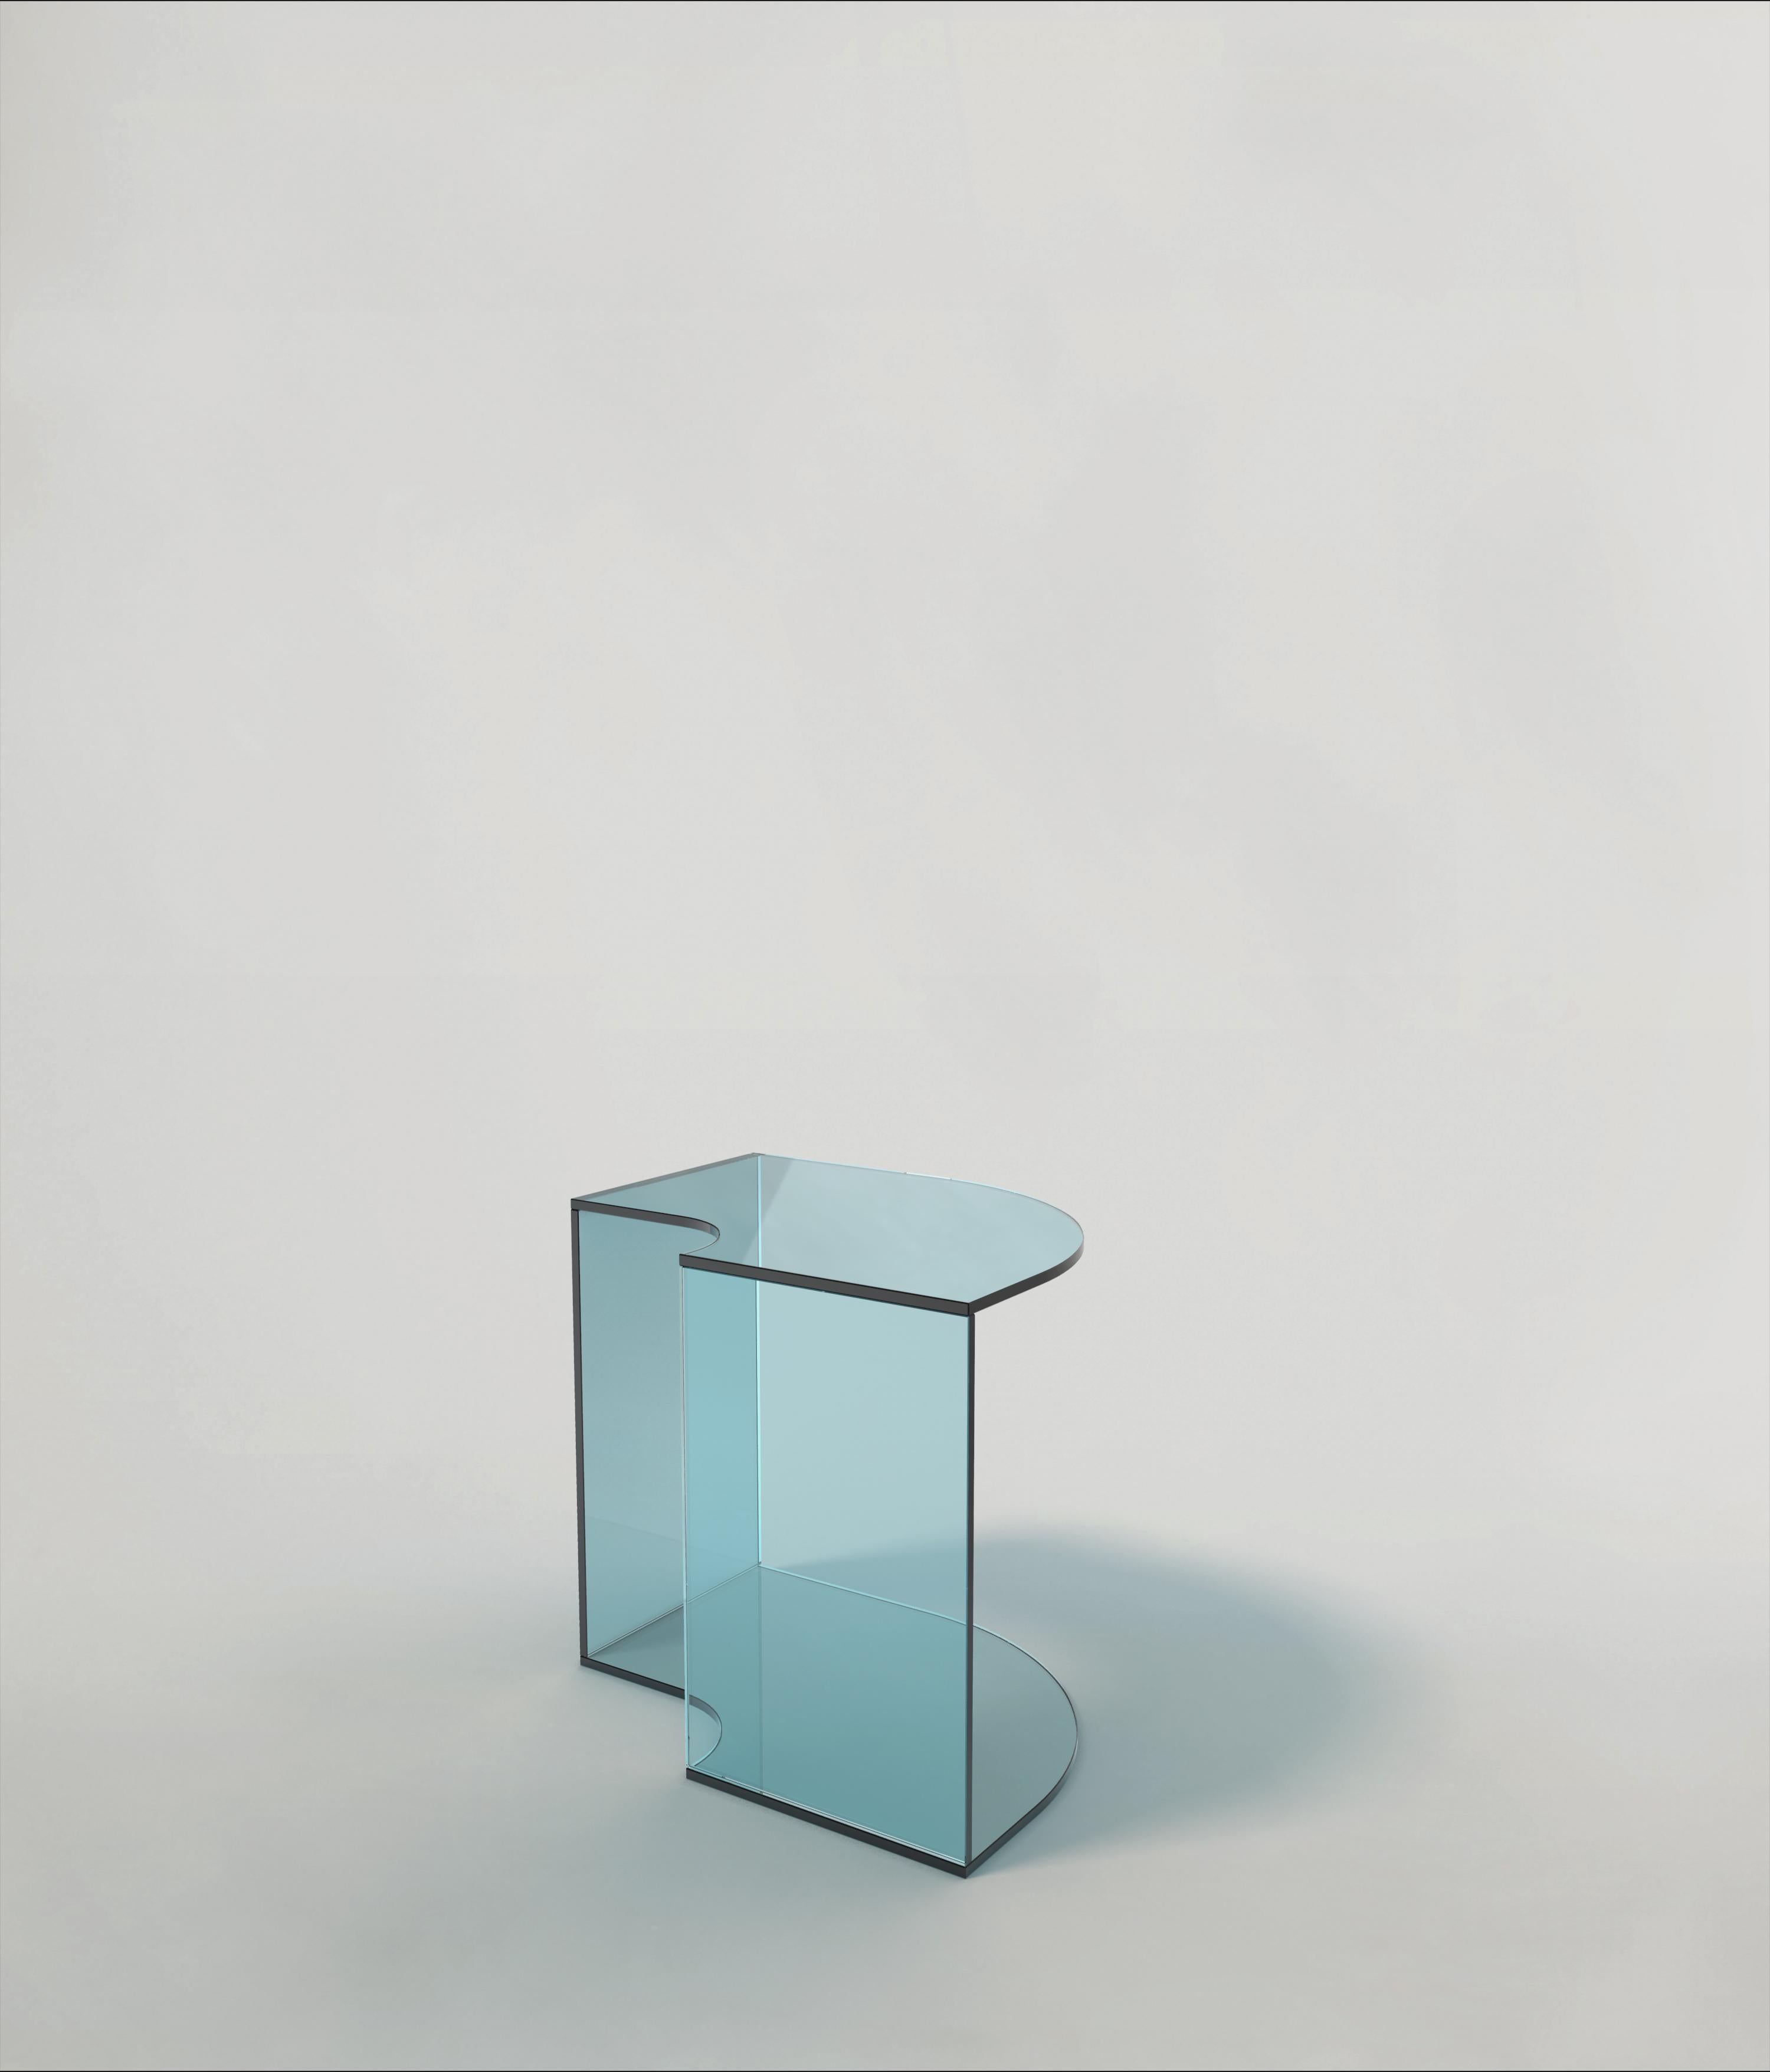 Quarter V1 side table by Edizione Limitata
Limited Edition of 1000 pieces. Signed and numbered.
Dimensions: D 45 x W 35 x H 41 cm
Materials: blue finish shiny glass,

Quarter is a collection of contemporary side tables made by Italian artisans in